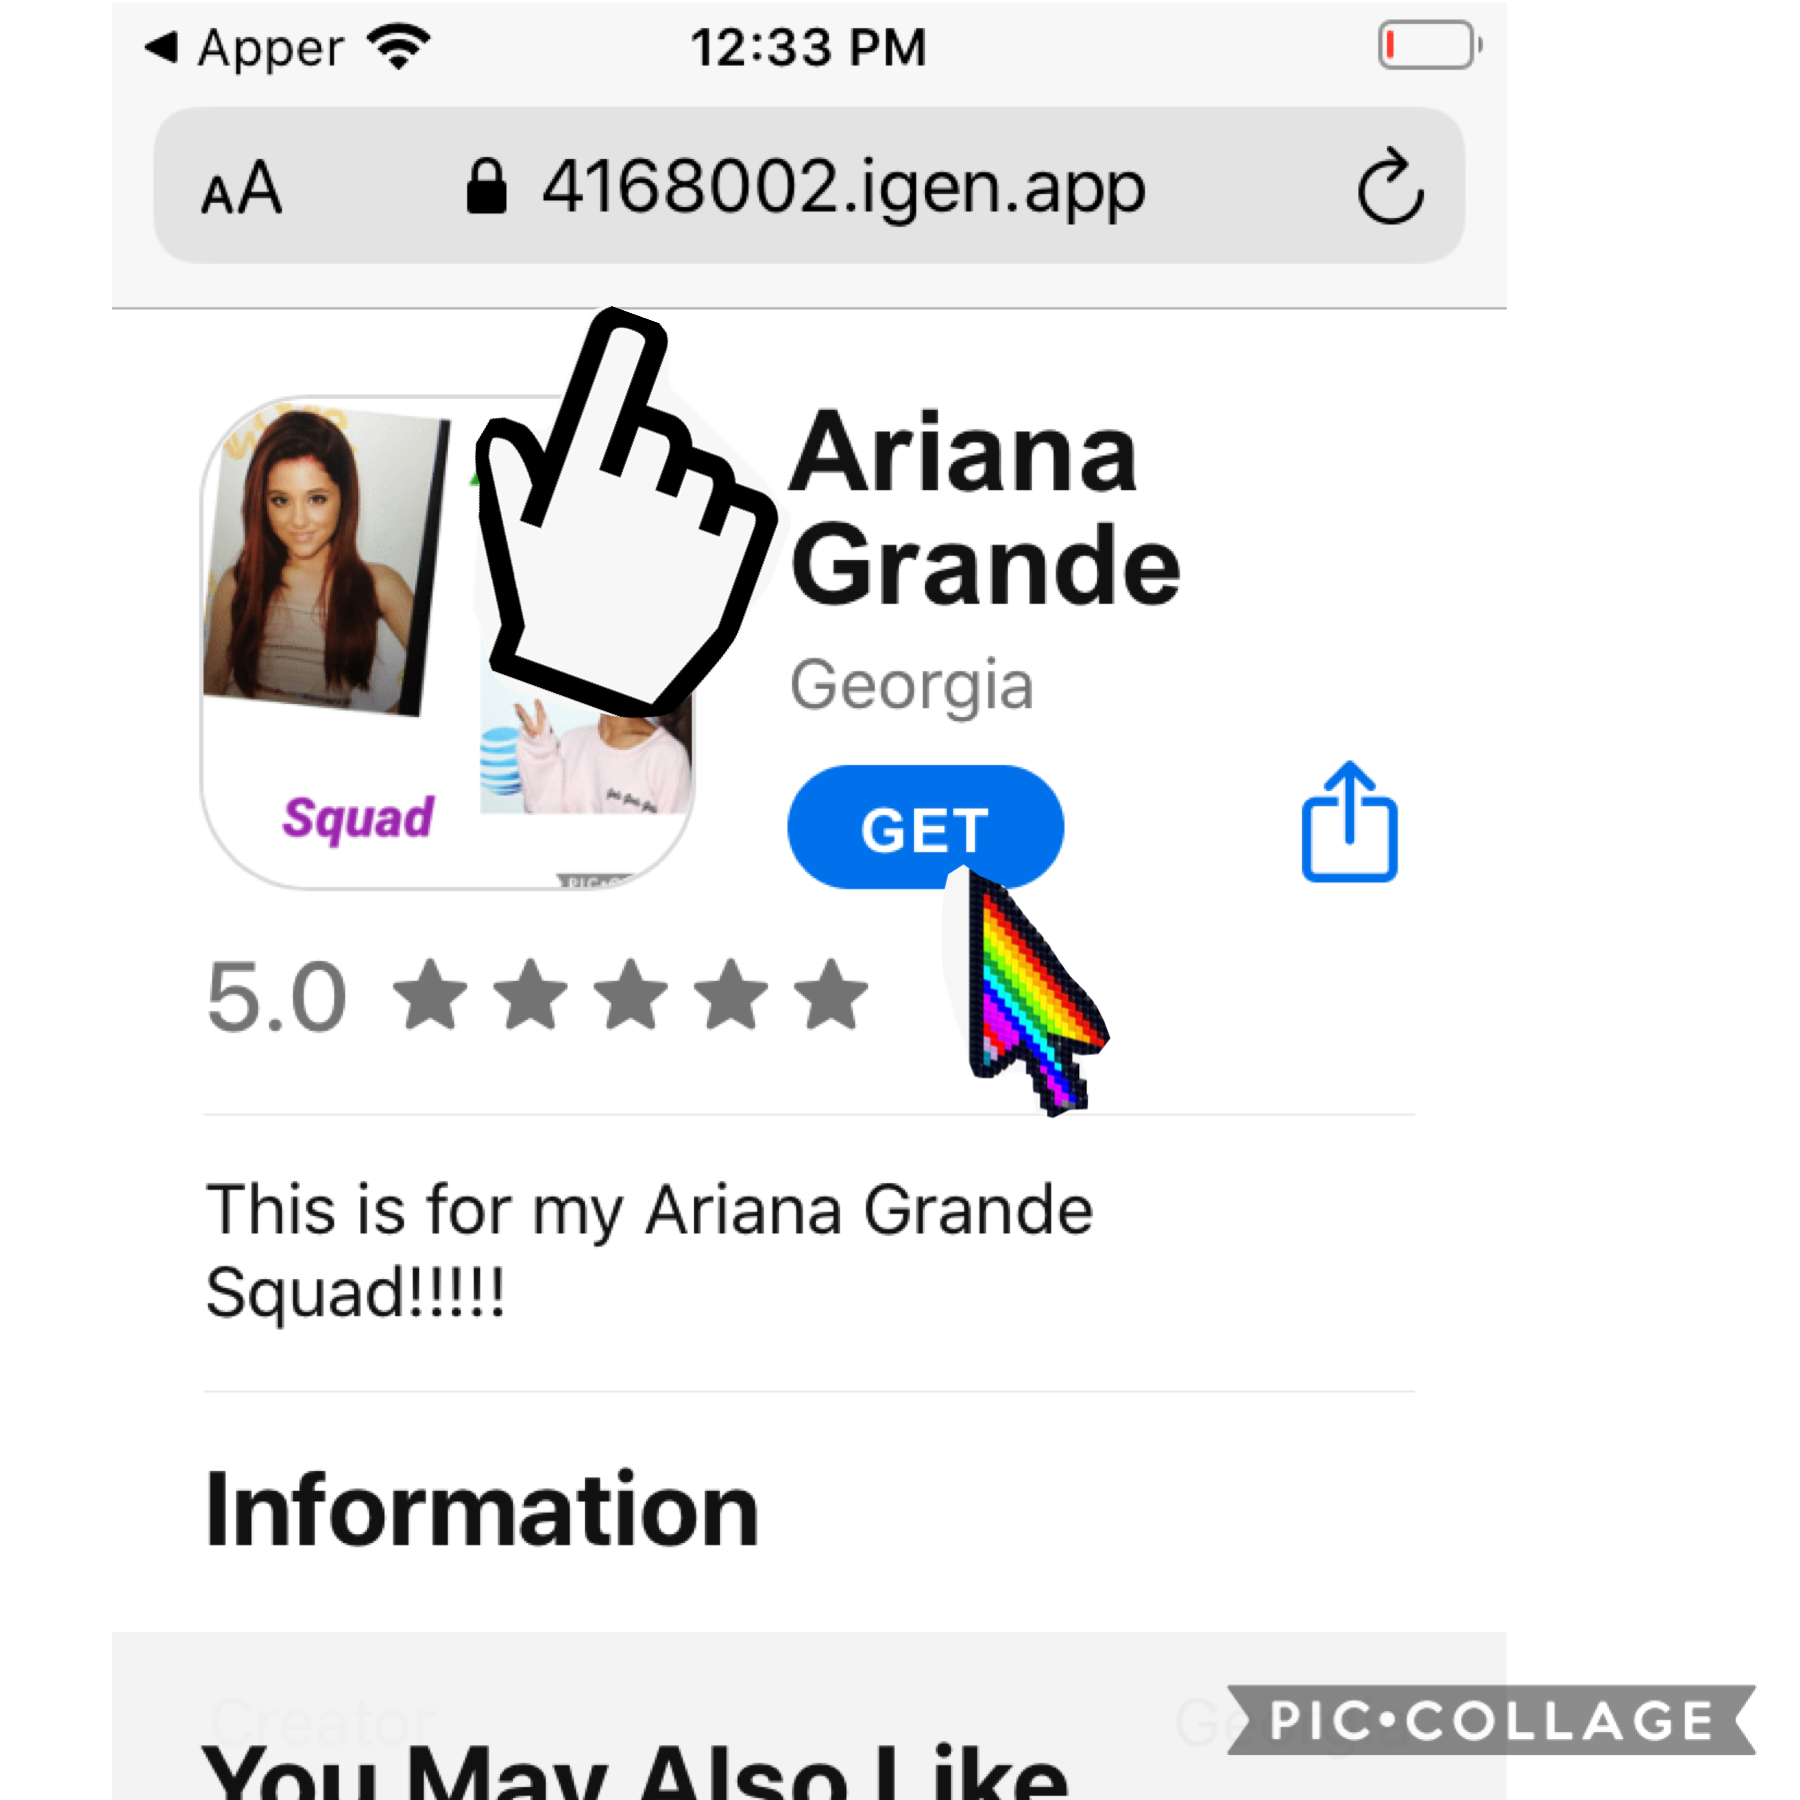 If you are in the Ariana Grande squad are wanna be in it gets my new app. We have mighty networks and flipgrid. Plz email me at georgiaschwartz10@icloud.com if u wanna join and tell me your first and last name!!!! After u type it in search, get it!!!!